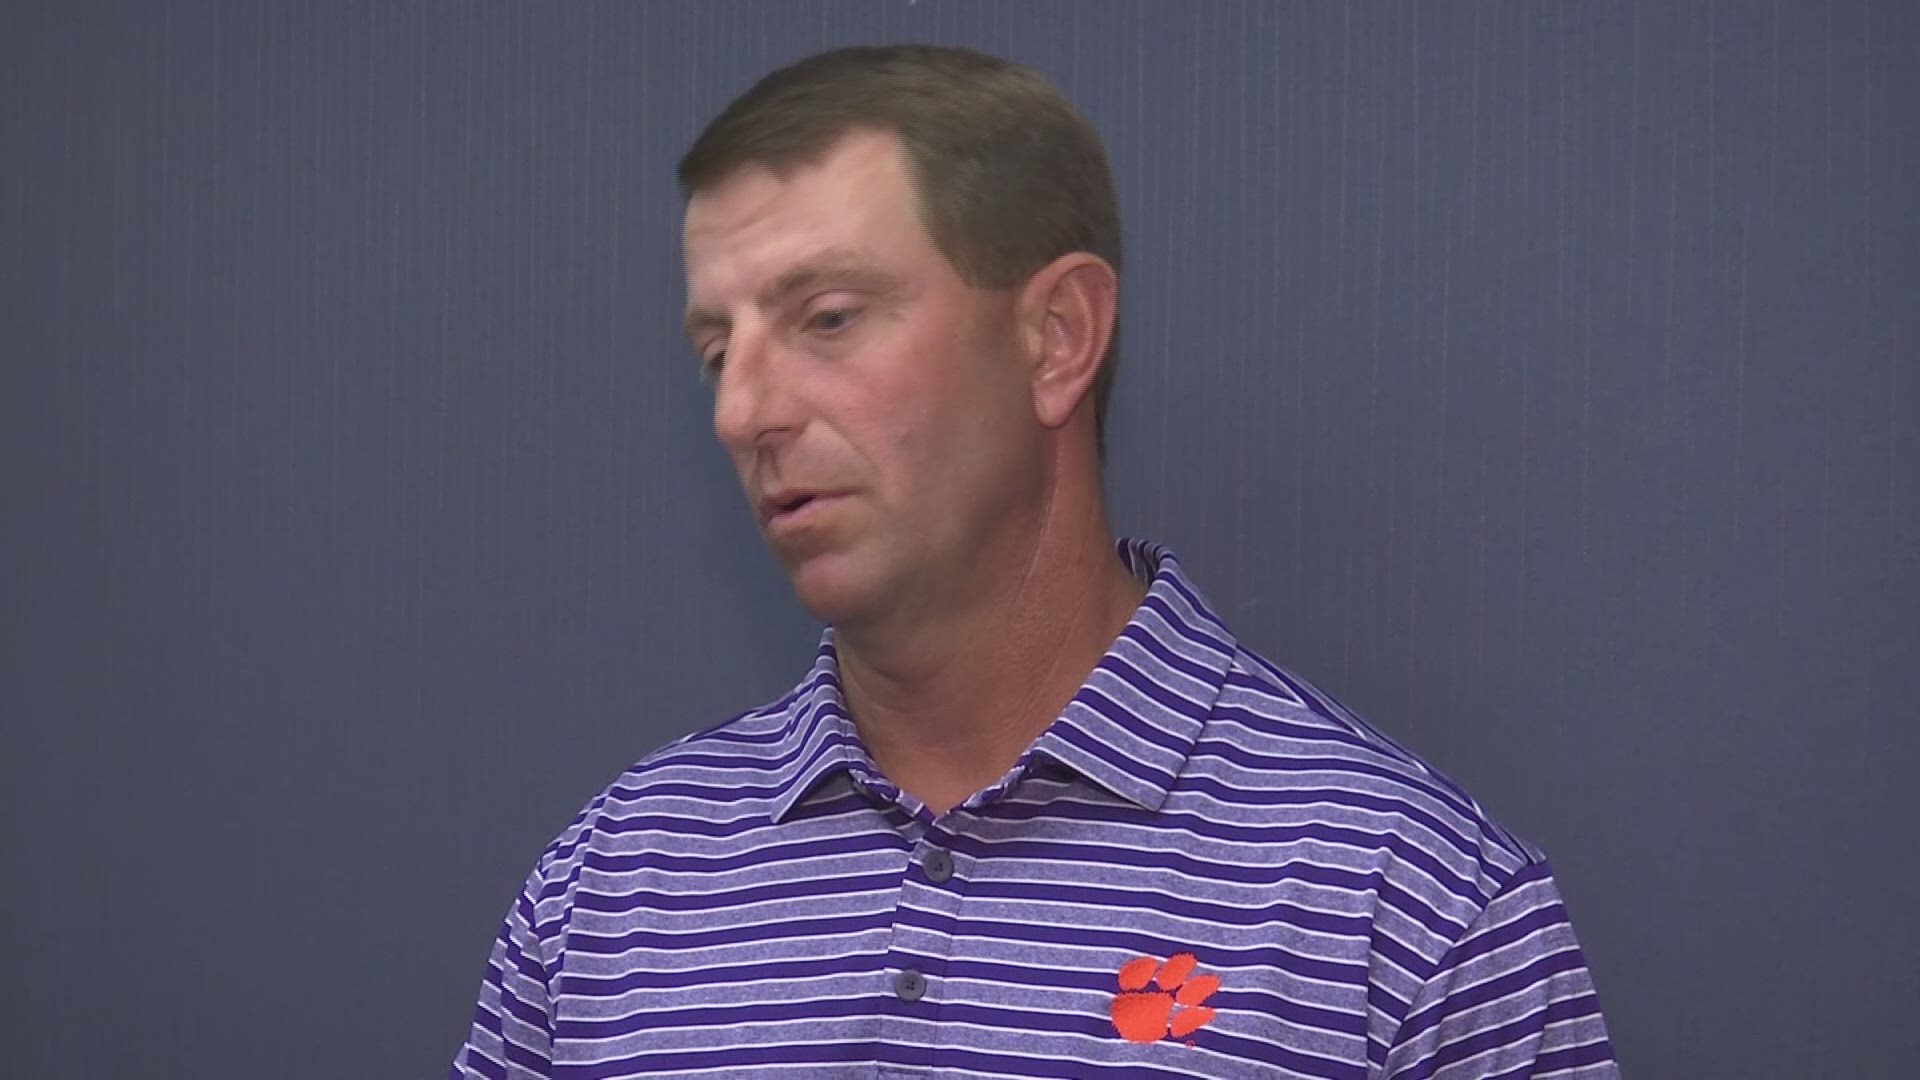 Dabo Swinney talks about the future with his 2019 and 2020 recruiting classes. Currently Clemson has the top ranked recruiting class in the country for 2020.